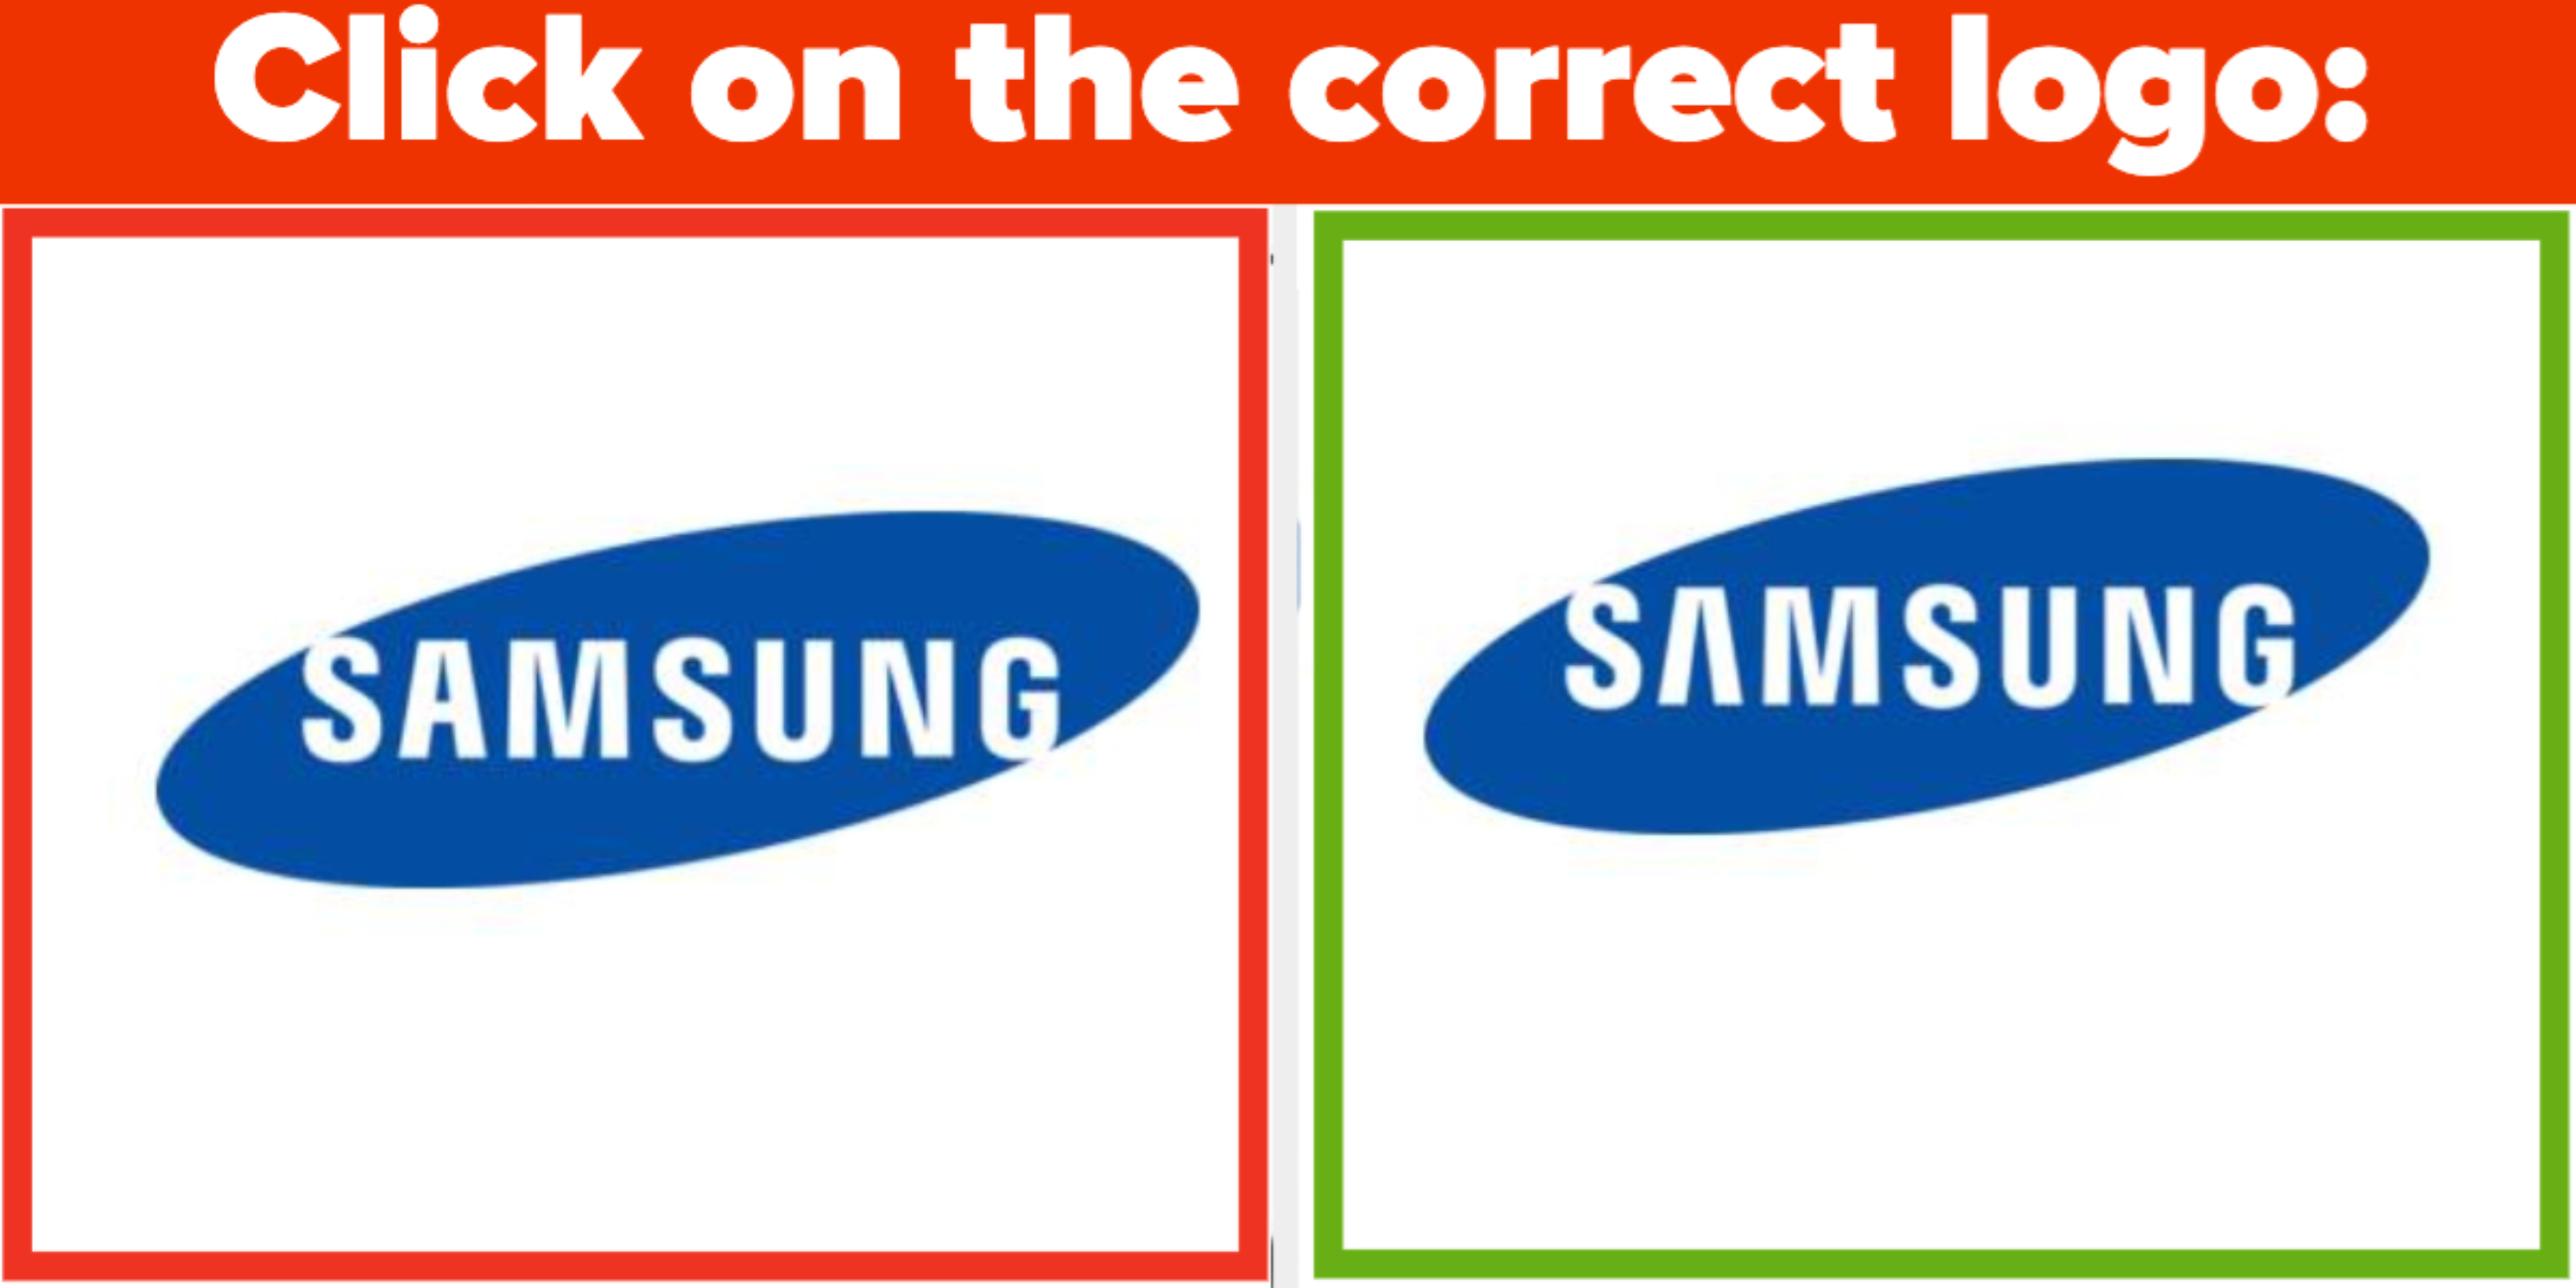 Test How Good Your Memory Is and Guess the Correct Logos (16 Pics